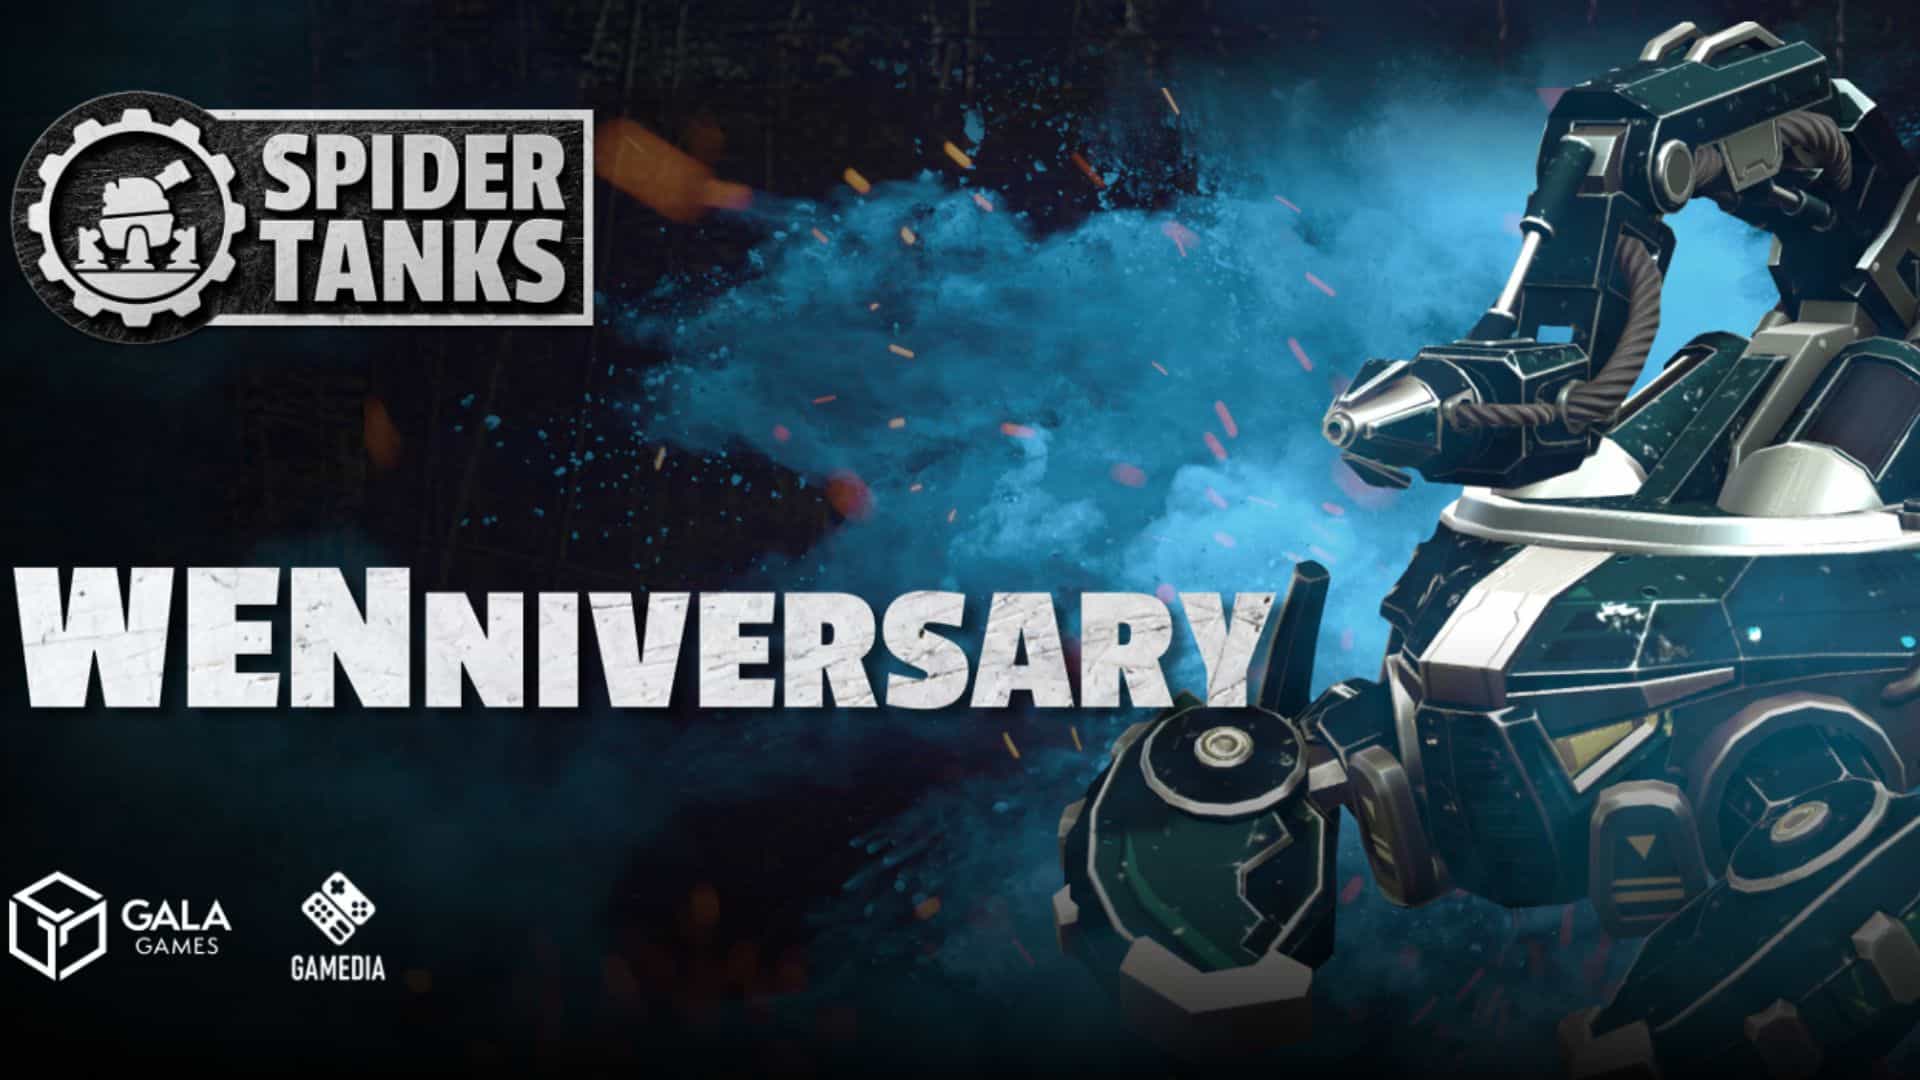 Spider Tanks Celebrates WENniversary With Limited Skins The WENniversary campaign is the game's "thank you." The WENniversary will bring three new skins to the surface that are limited because the WENniversary will occur only once, starting from today!